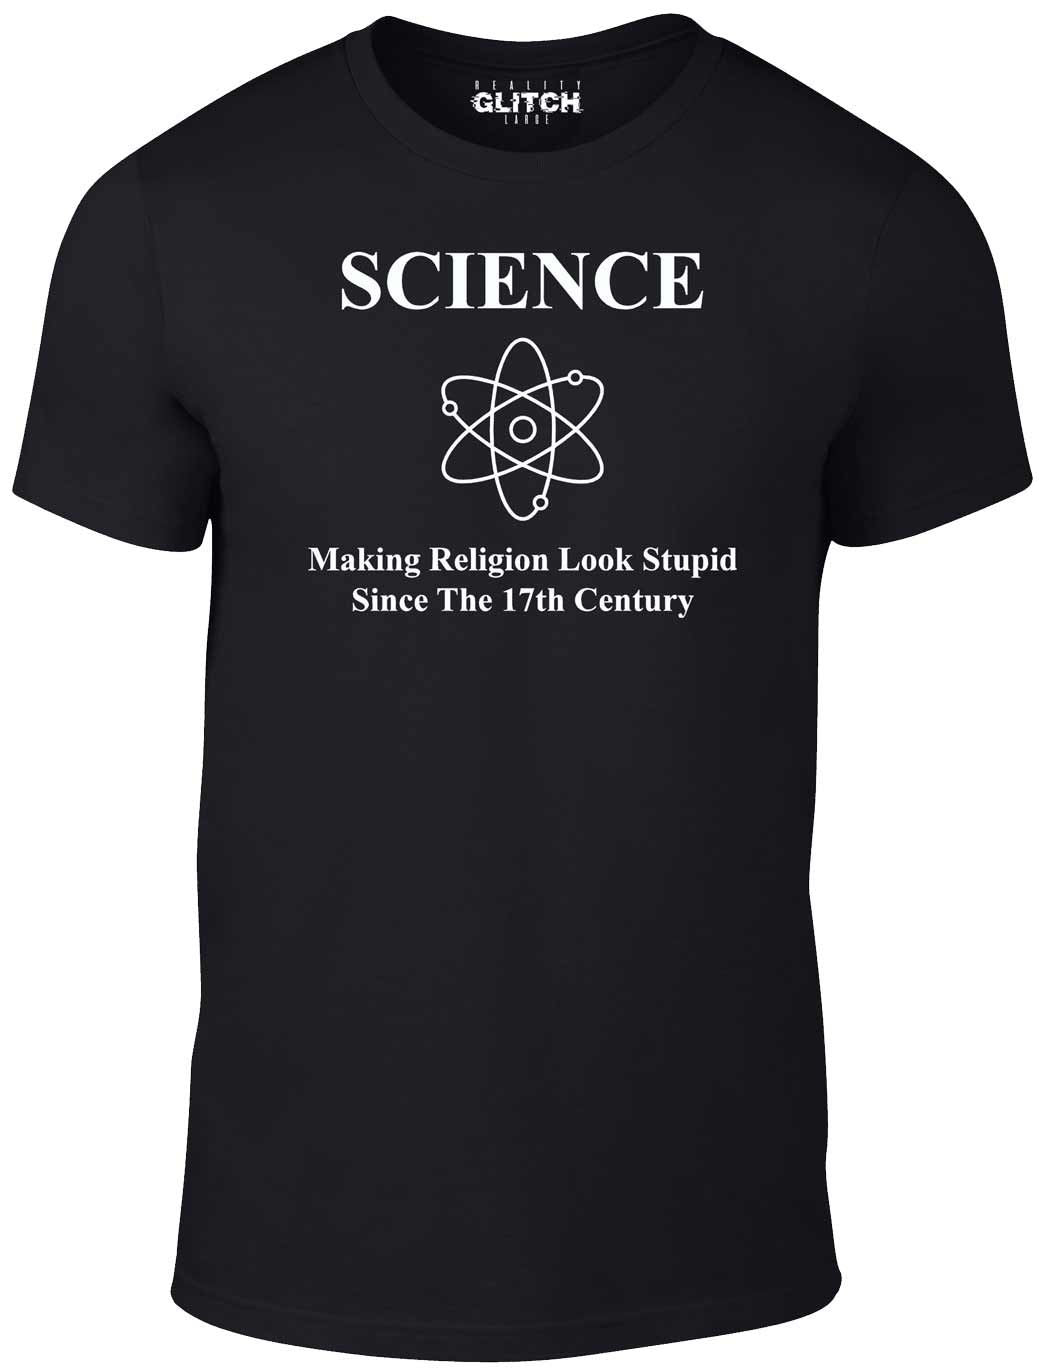 Men's Black T-shirt With a Funny science slogan Printed Design